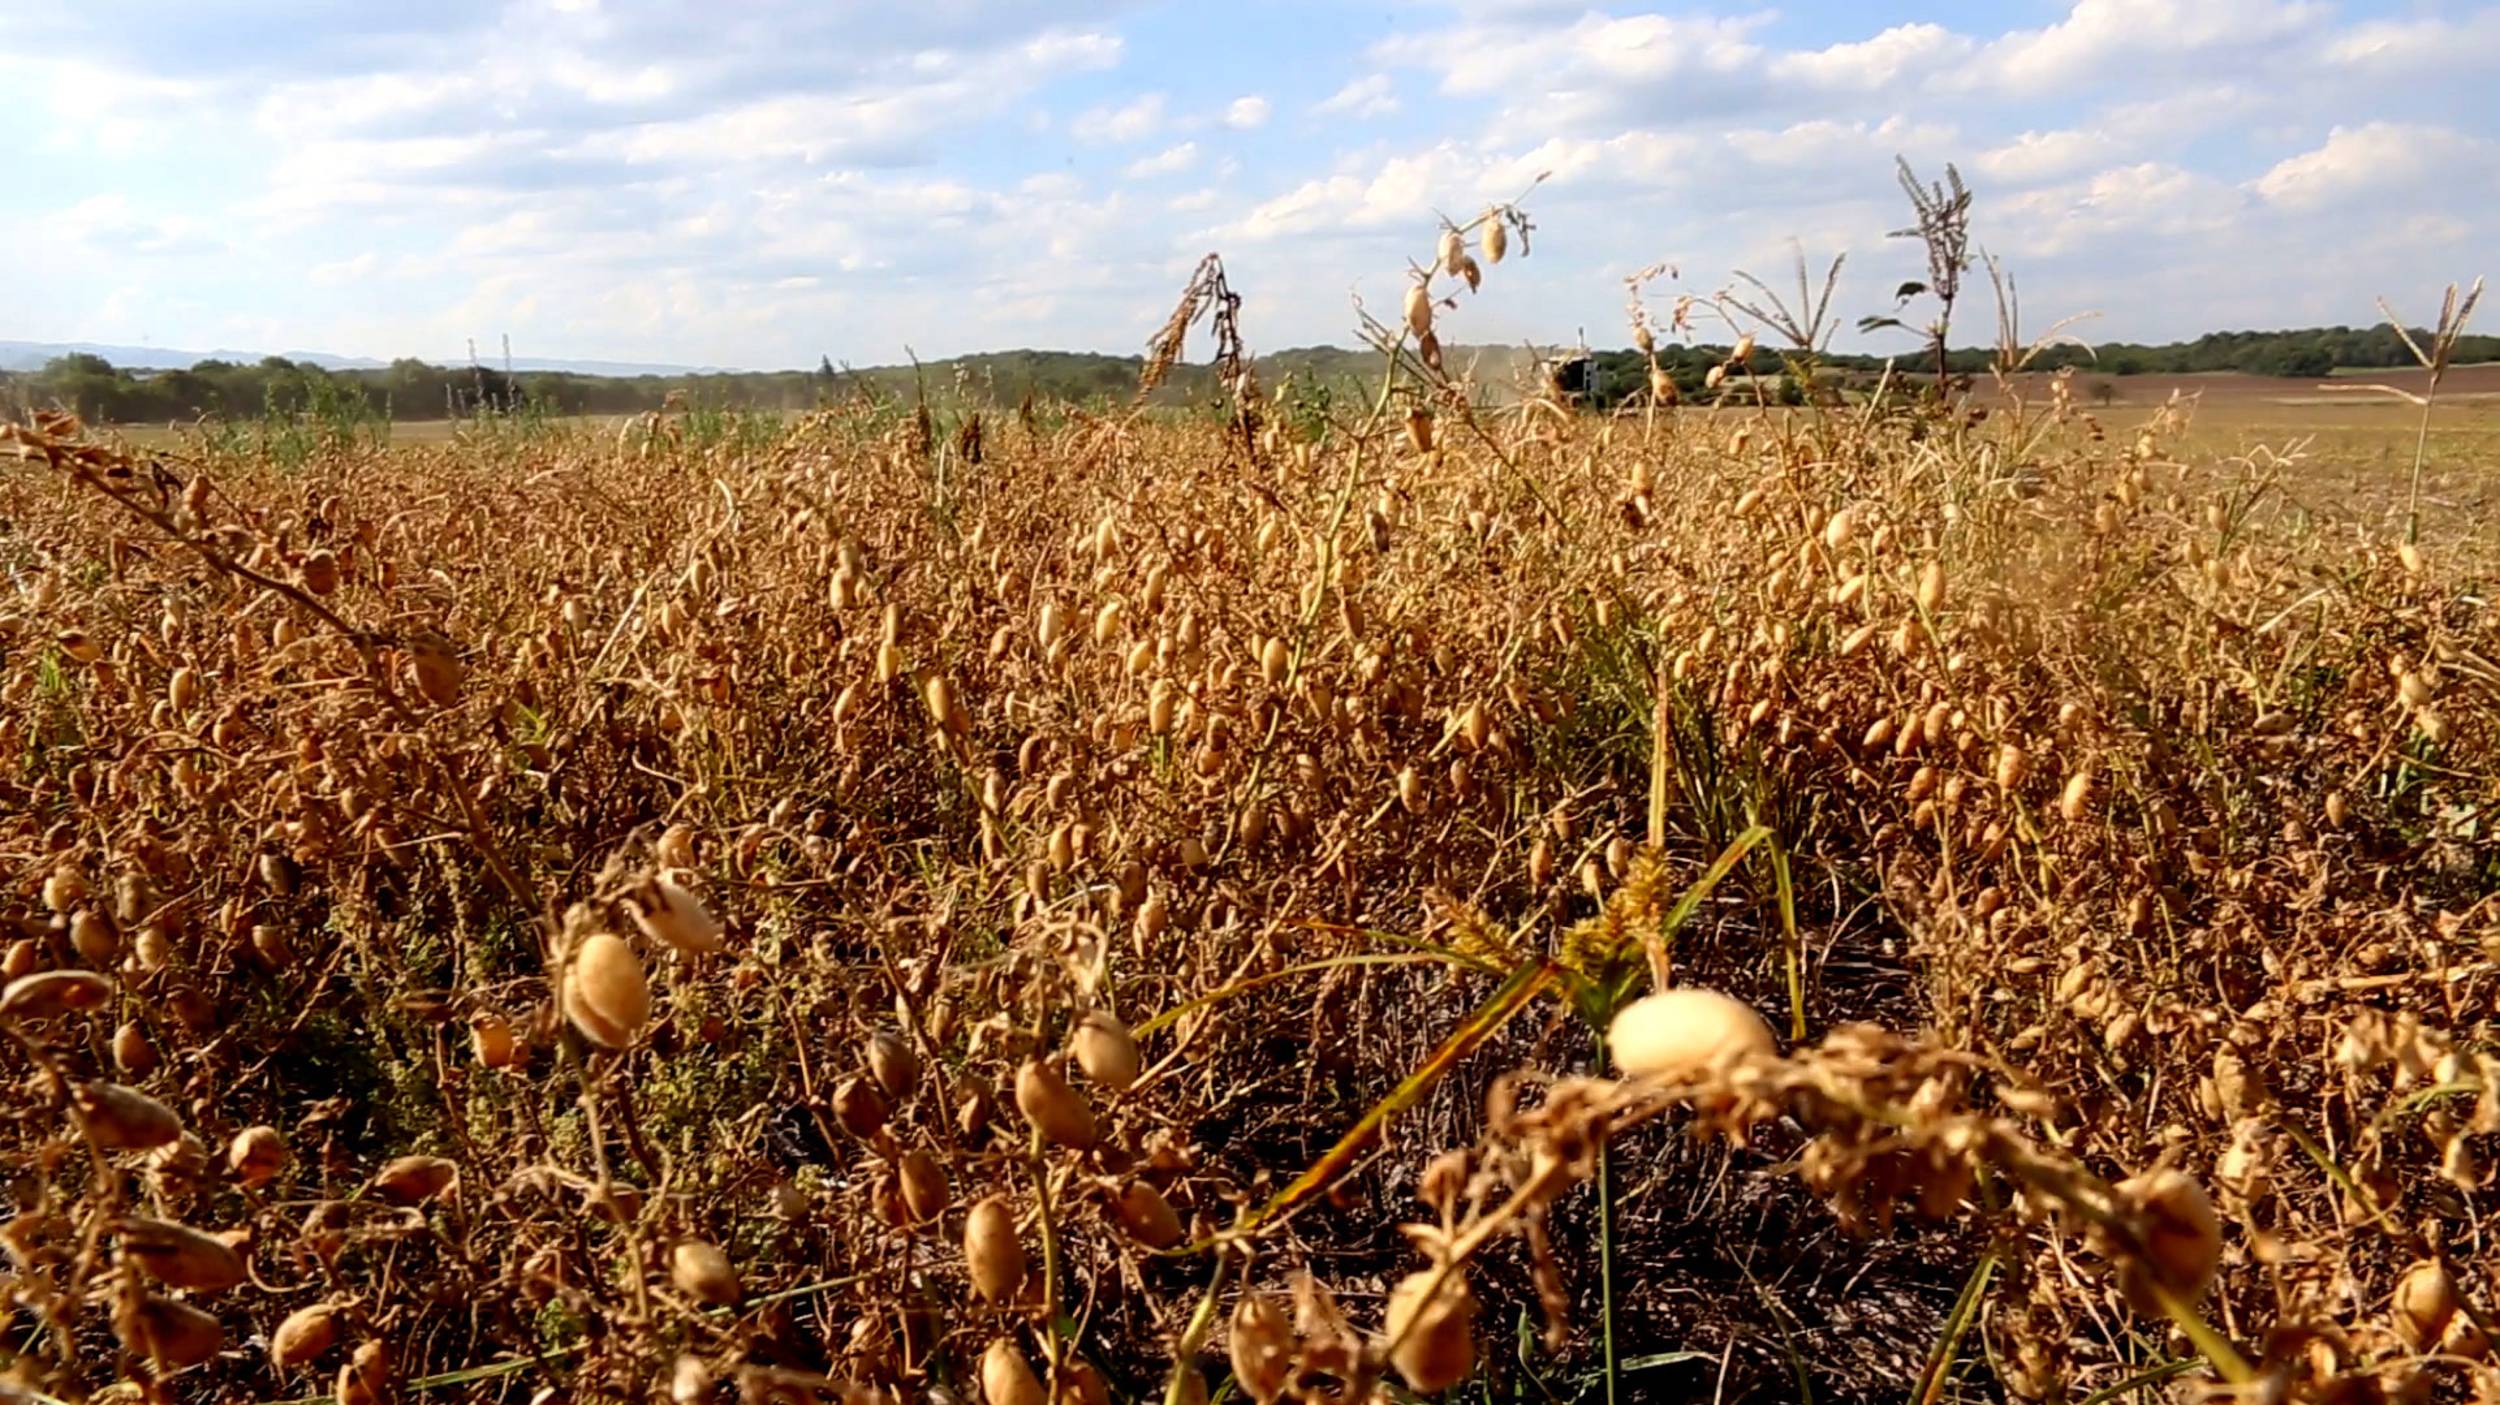 In the fertile north of Argentina, the conditions for growing chickpeas are ideal.